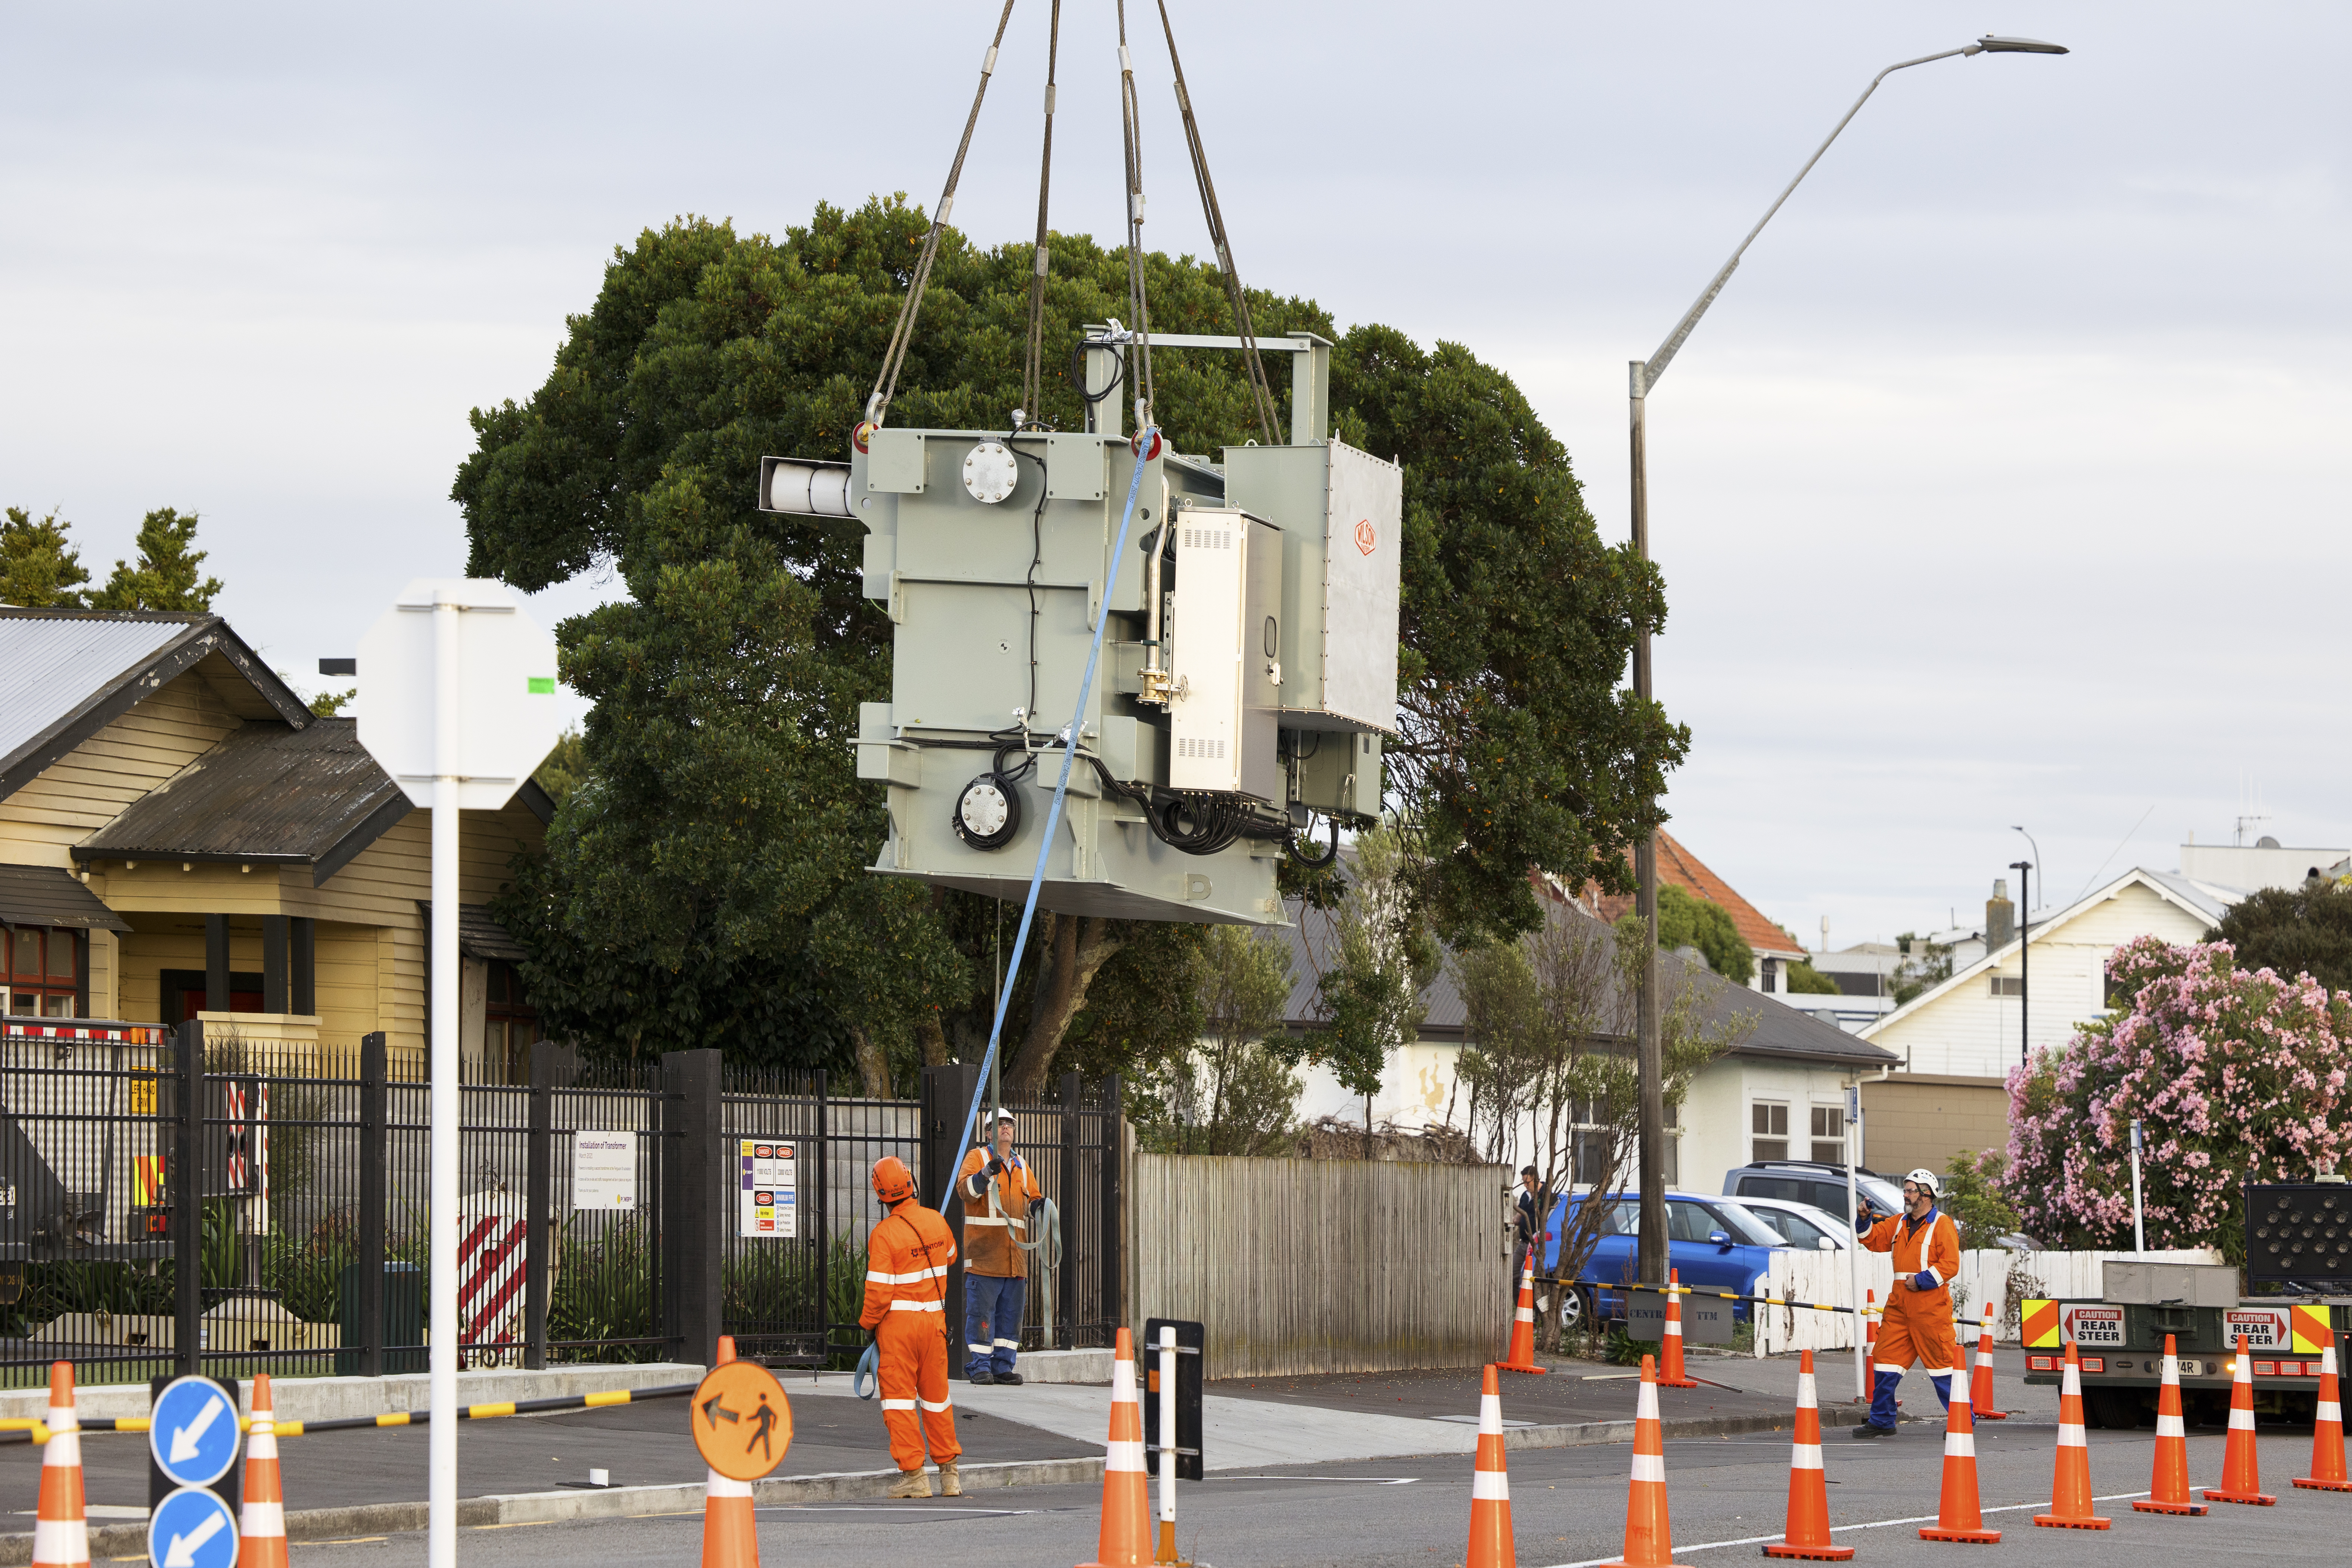 Transformer being craned into substation